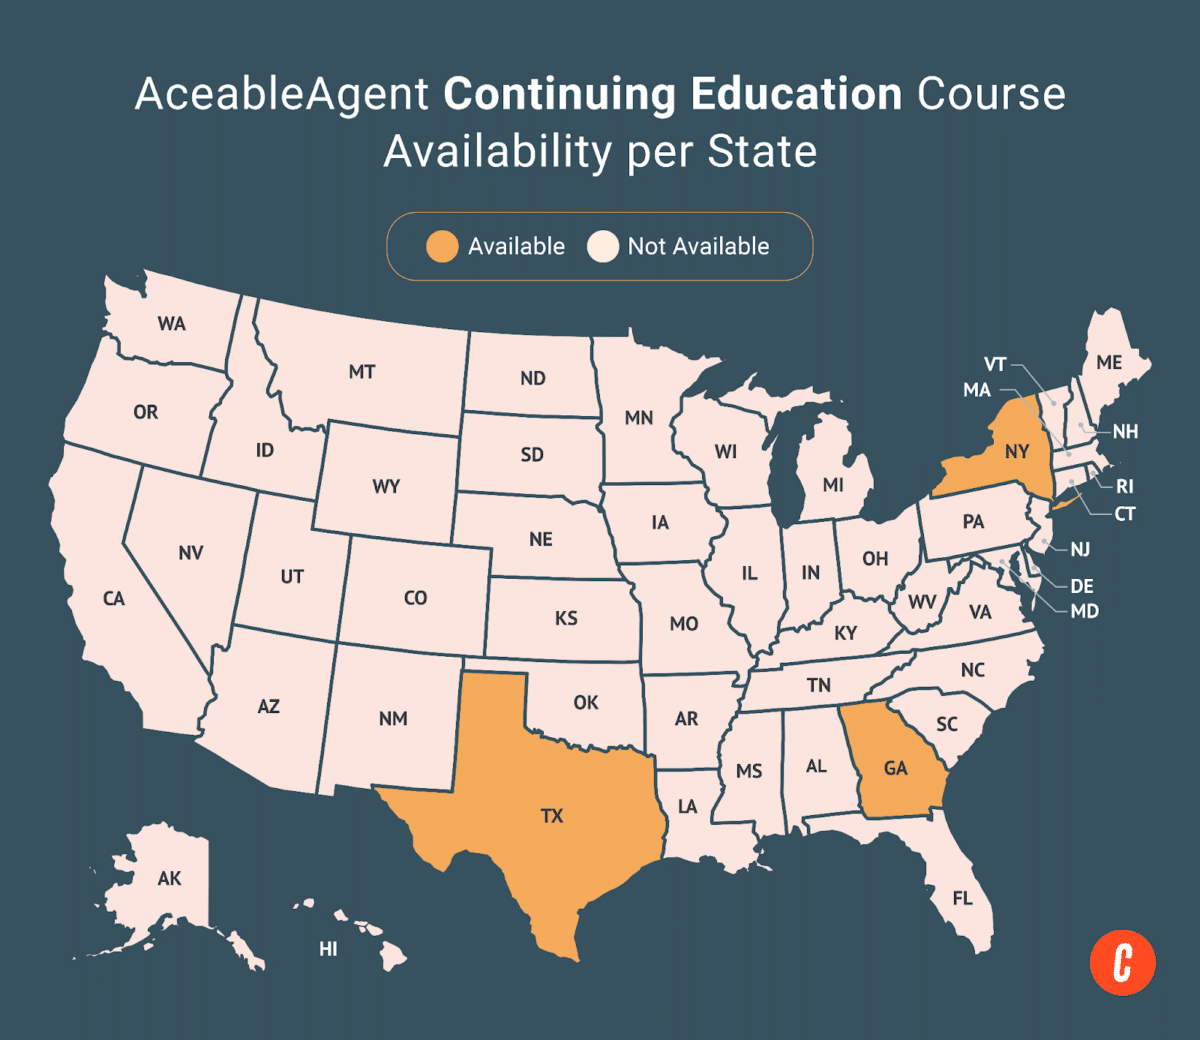 A U.S. map with states where AceableAgent's available continuing education courses are shaded